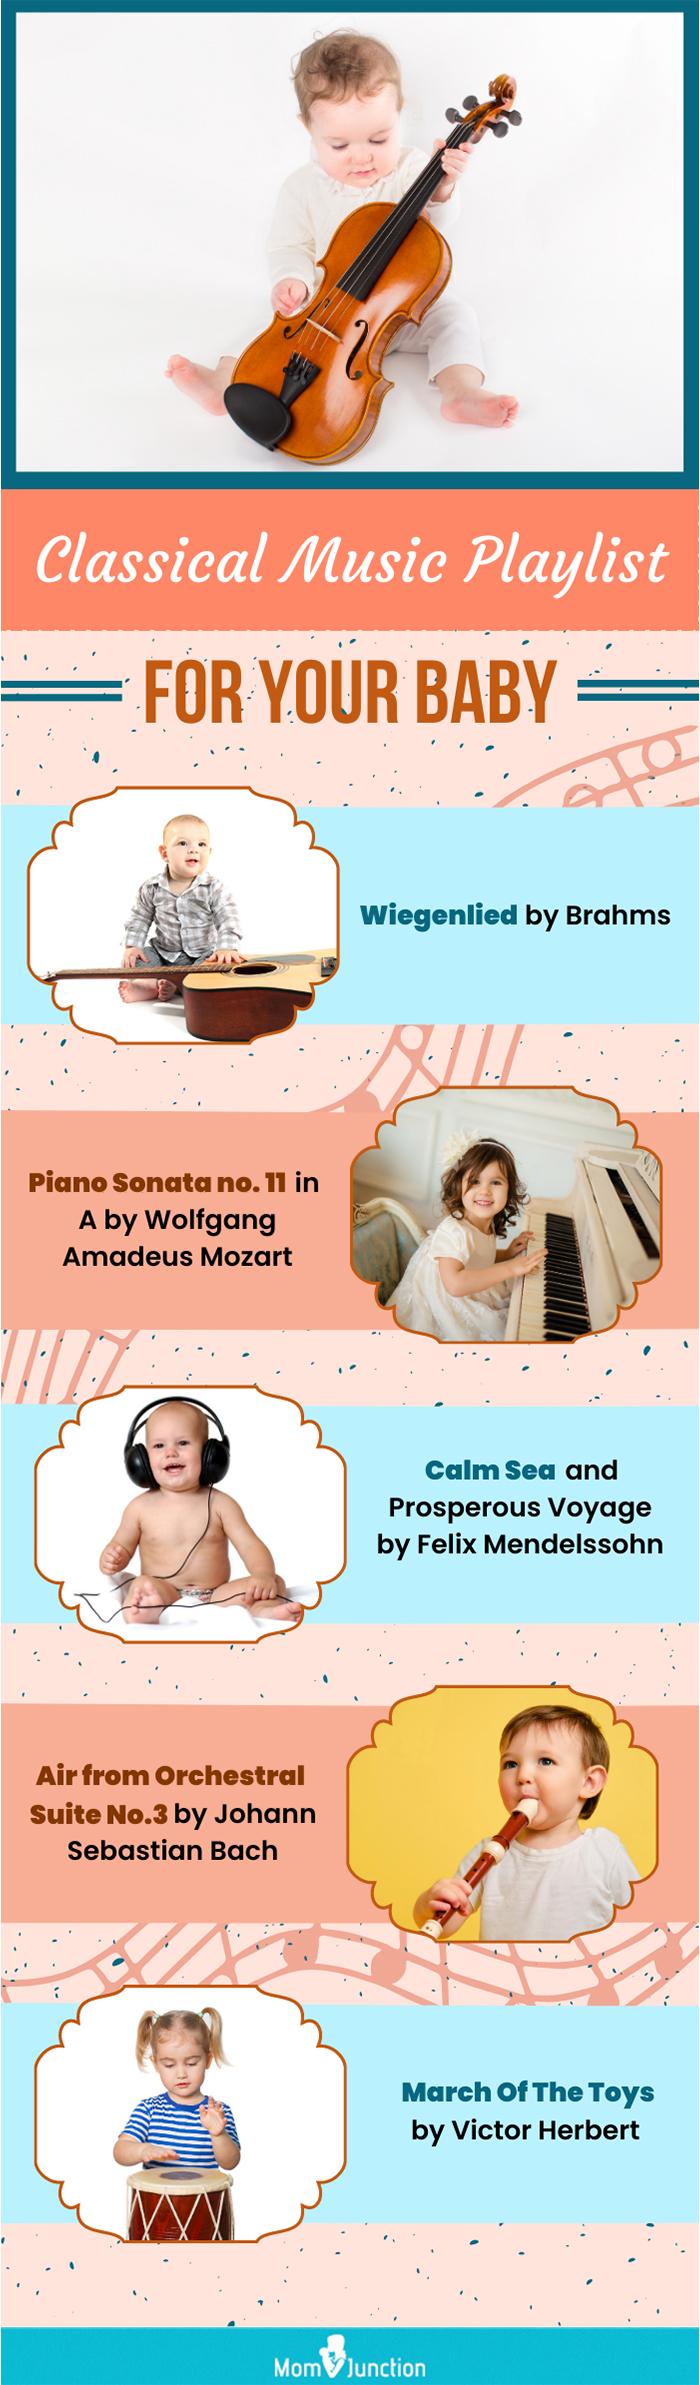 best classical music for babies (infographic)